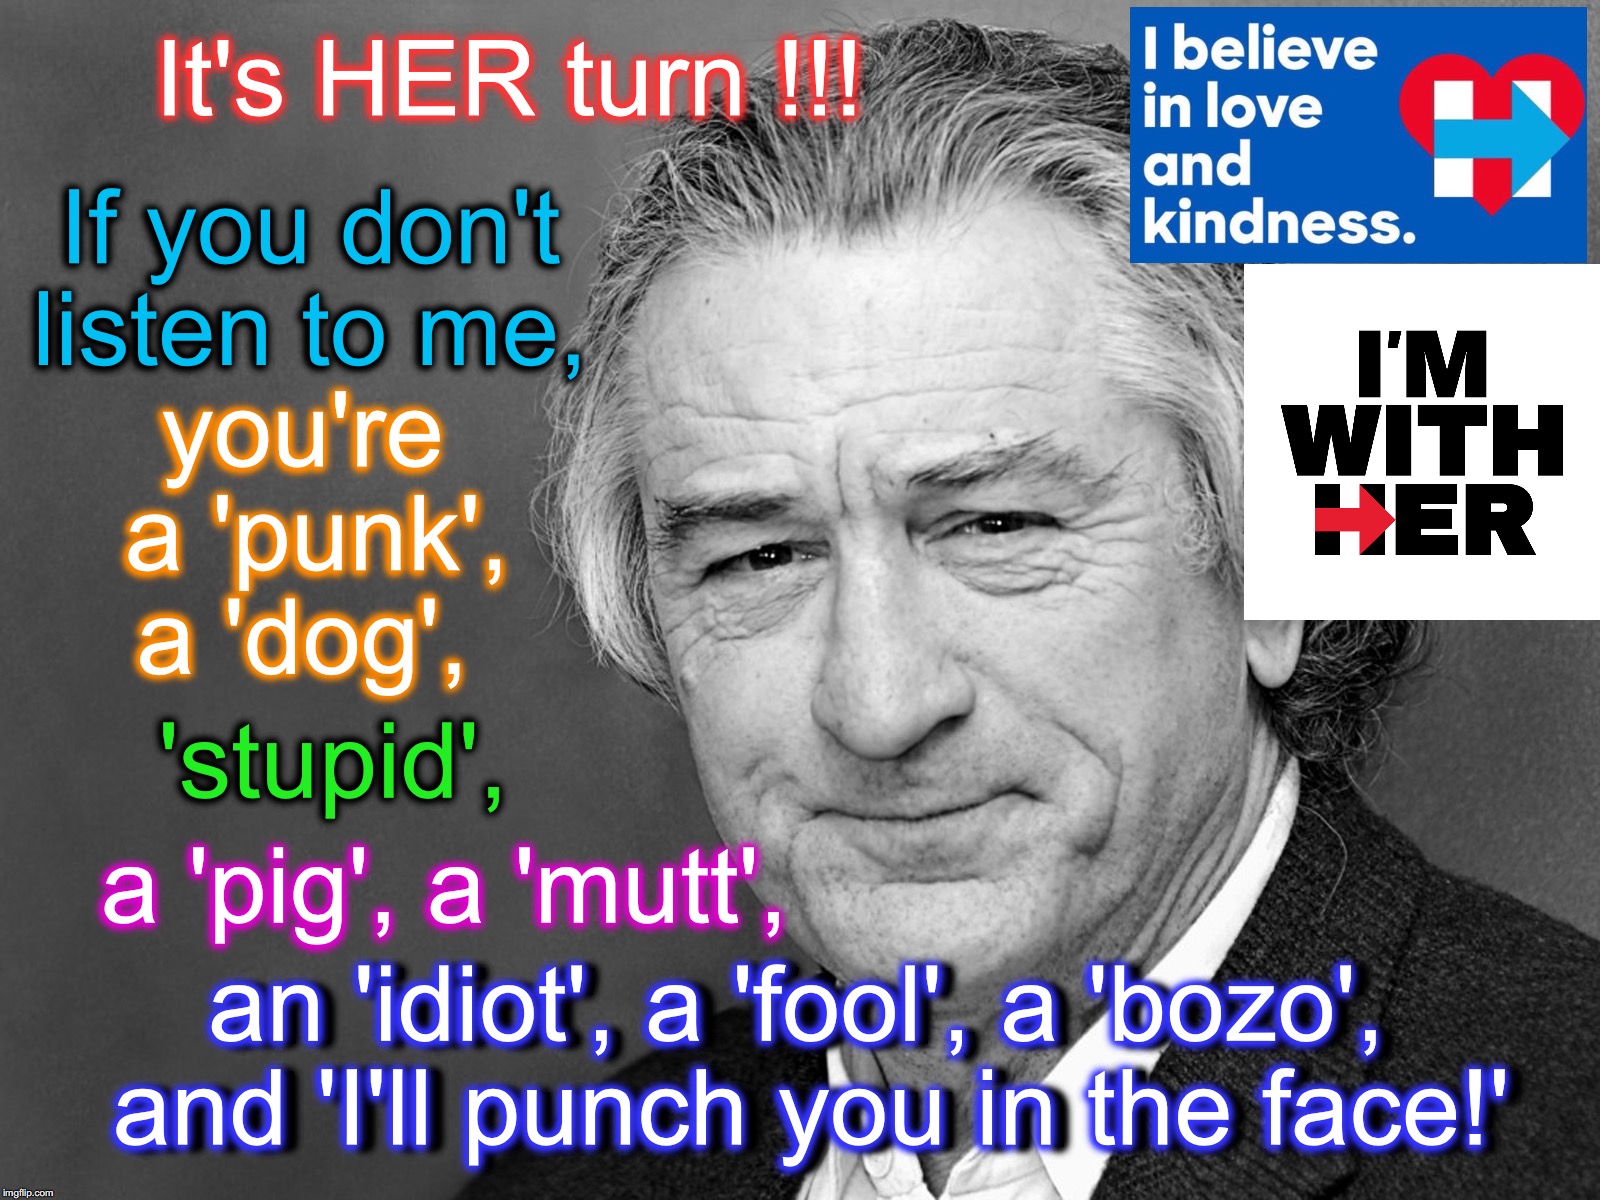 It's HER turn !!! If you don't listen to me, you're a 'punk', a 'dog', 'stupid', a 'pig', a 'mutt', an 'idiot', a 'fool', a 'bozo', and 'I'll punch you in the face!'; an 'idiot', a 'fool', a 'bozo', and 'I'll punch you in the face!' | image tagged in robert de niro,never hillary,neverhillary | made w/ Imgflip meme maker